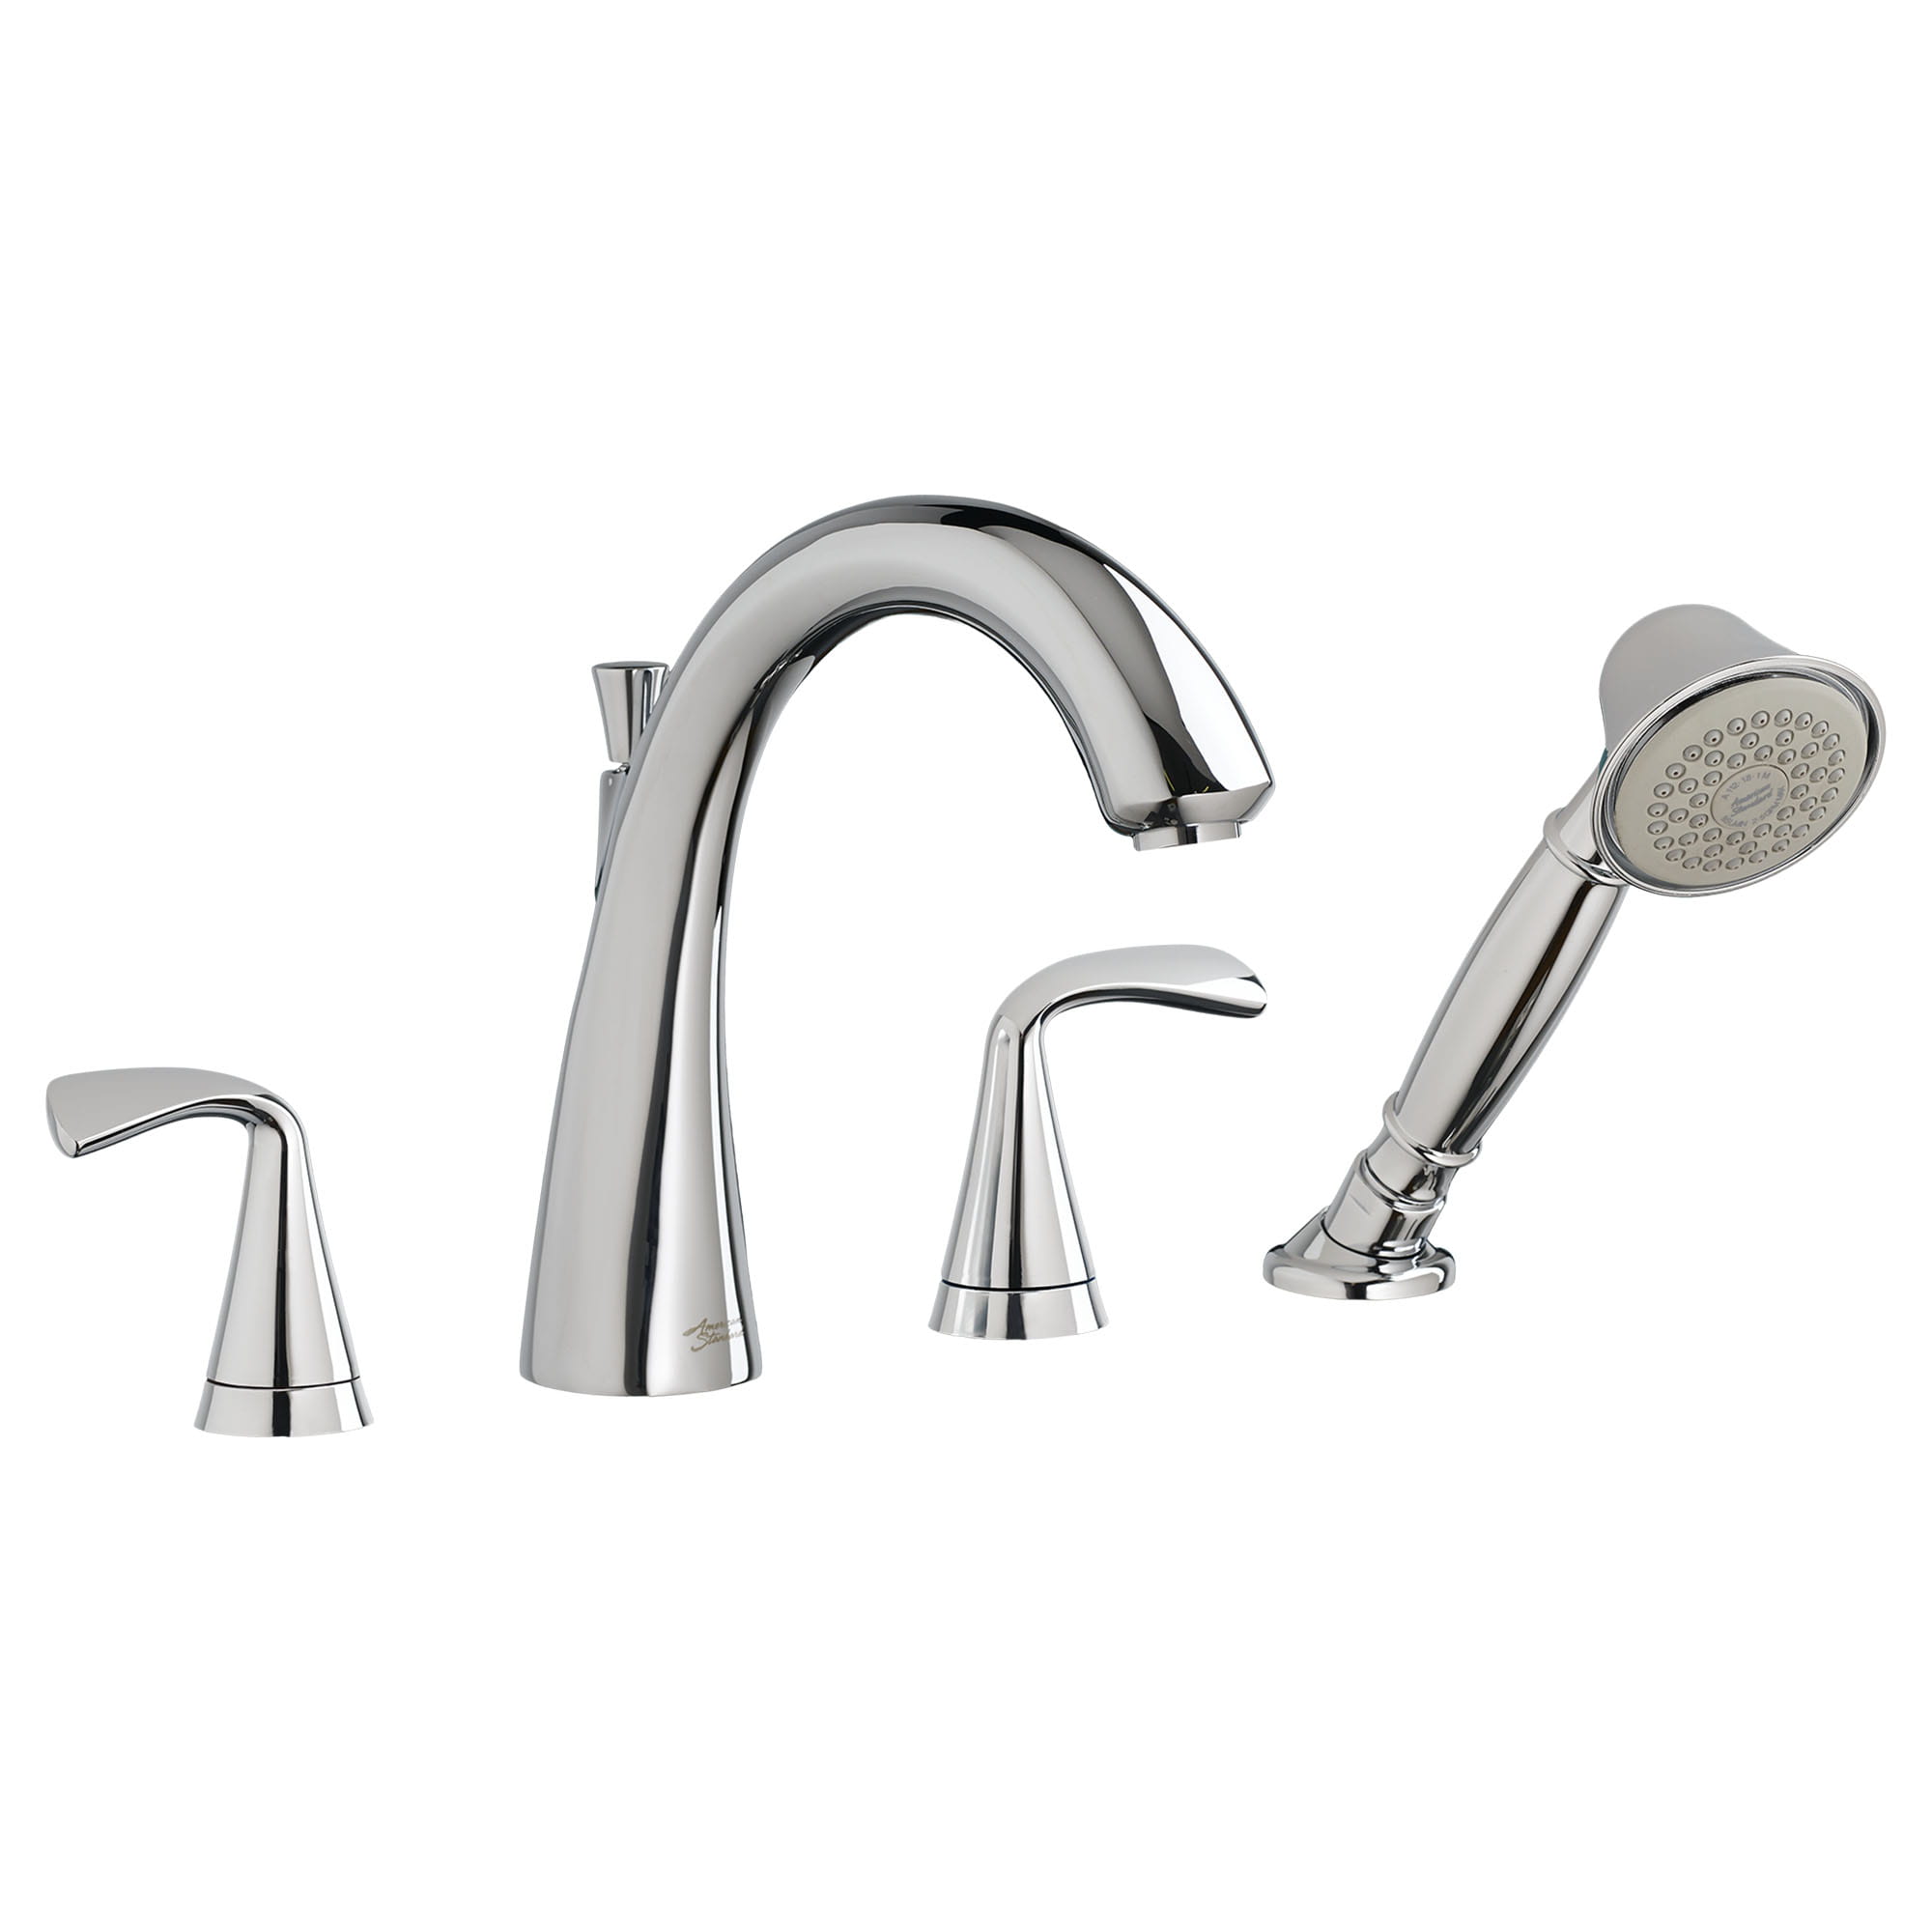 Fluent Bathtub Faucet With  Lever Handles and Personal Shower for Flash Rough In Valve CHROME